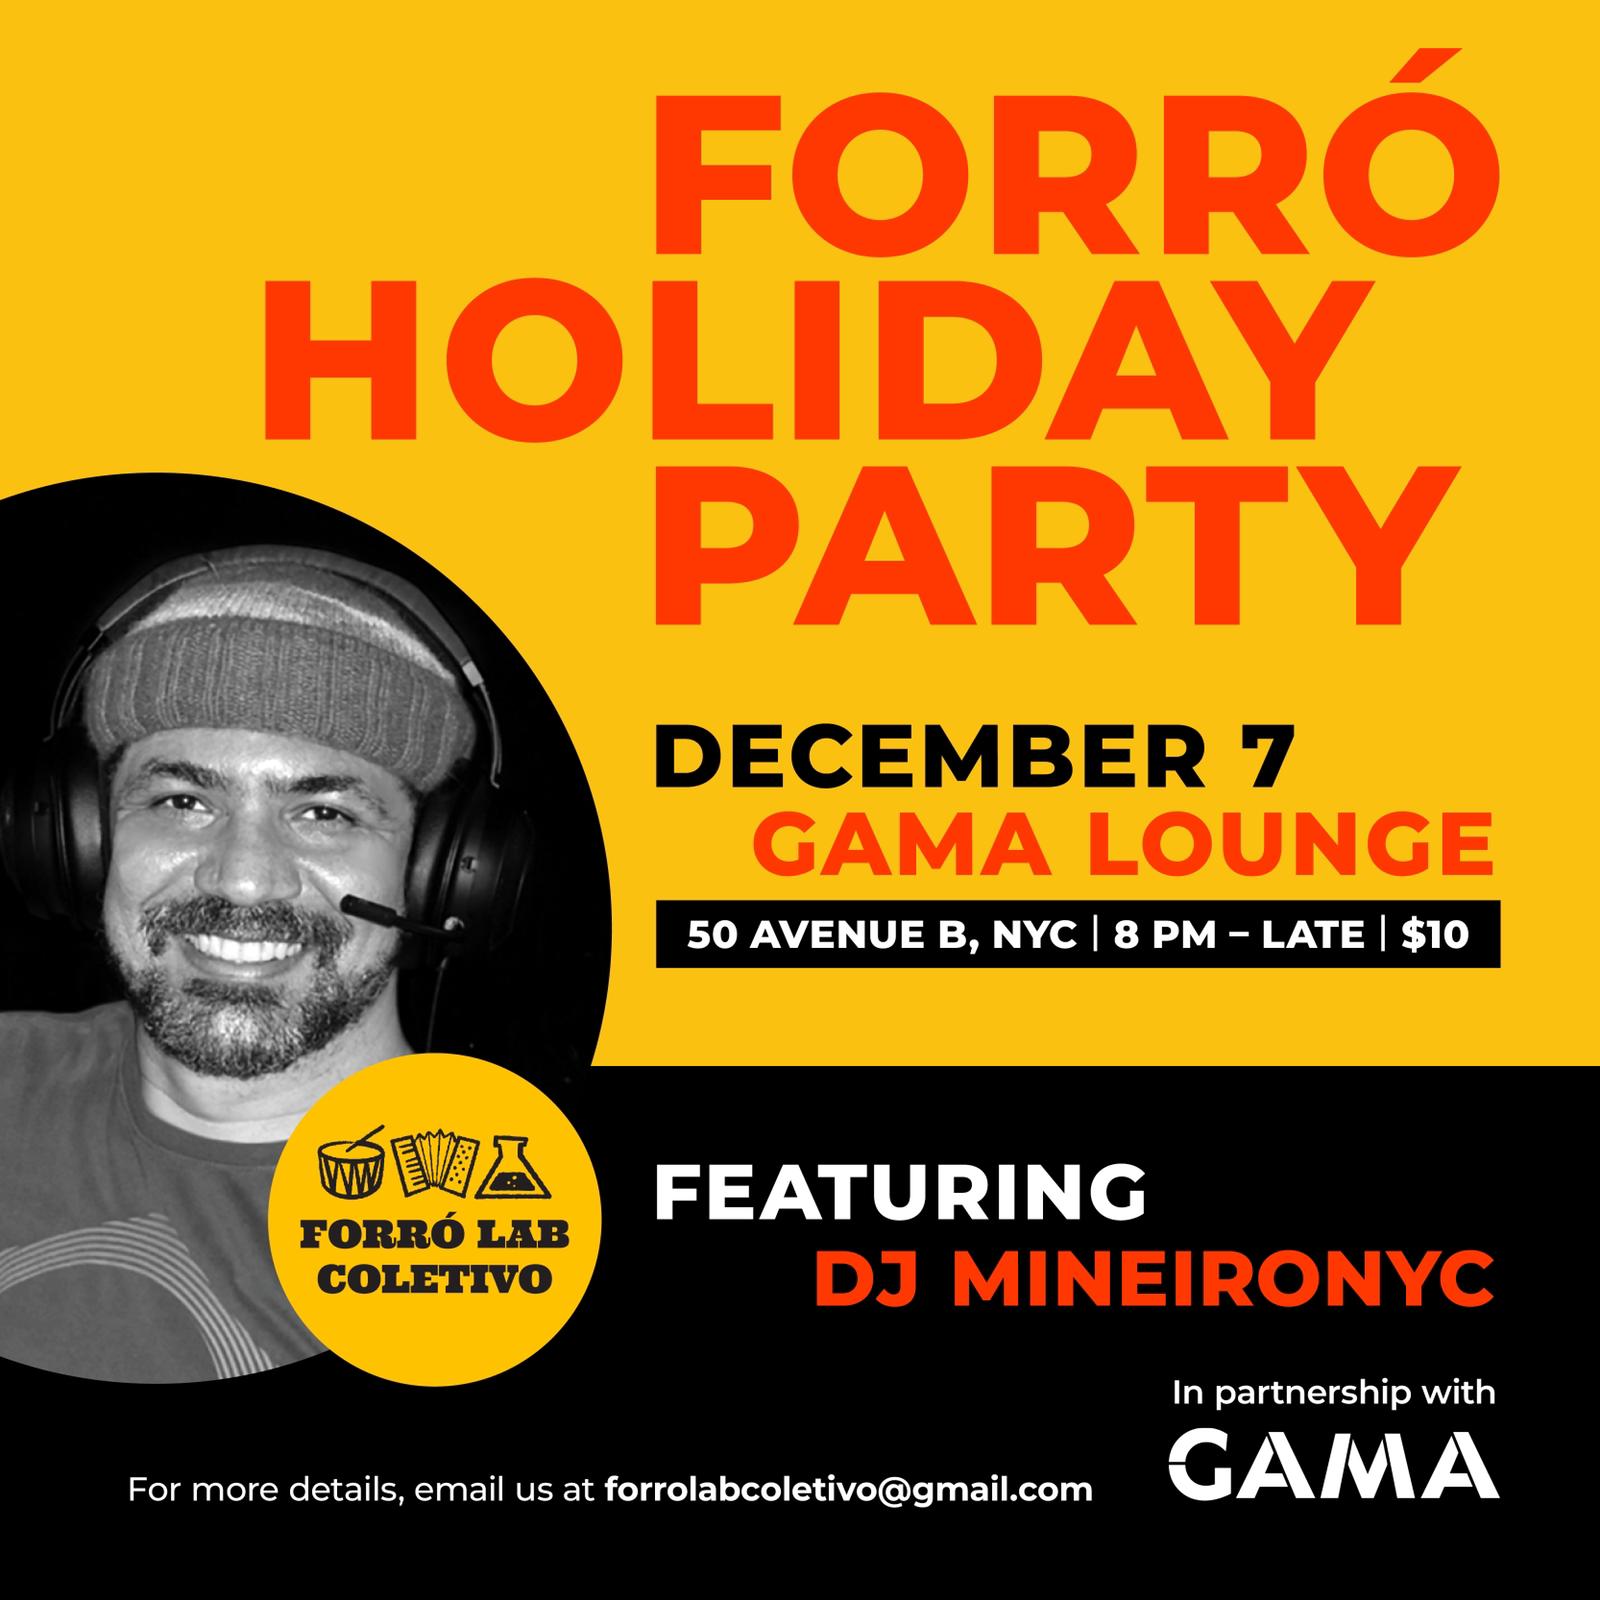 Forró Holiday Party - December 07 at 8pm